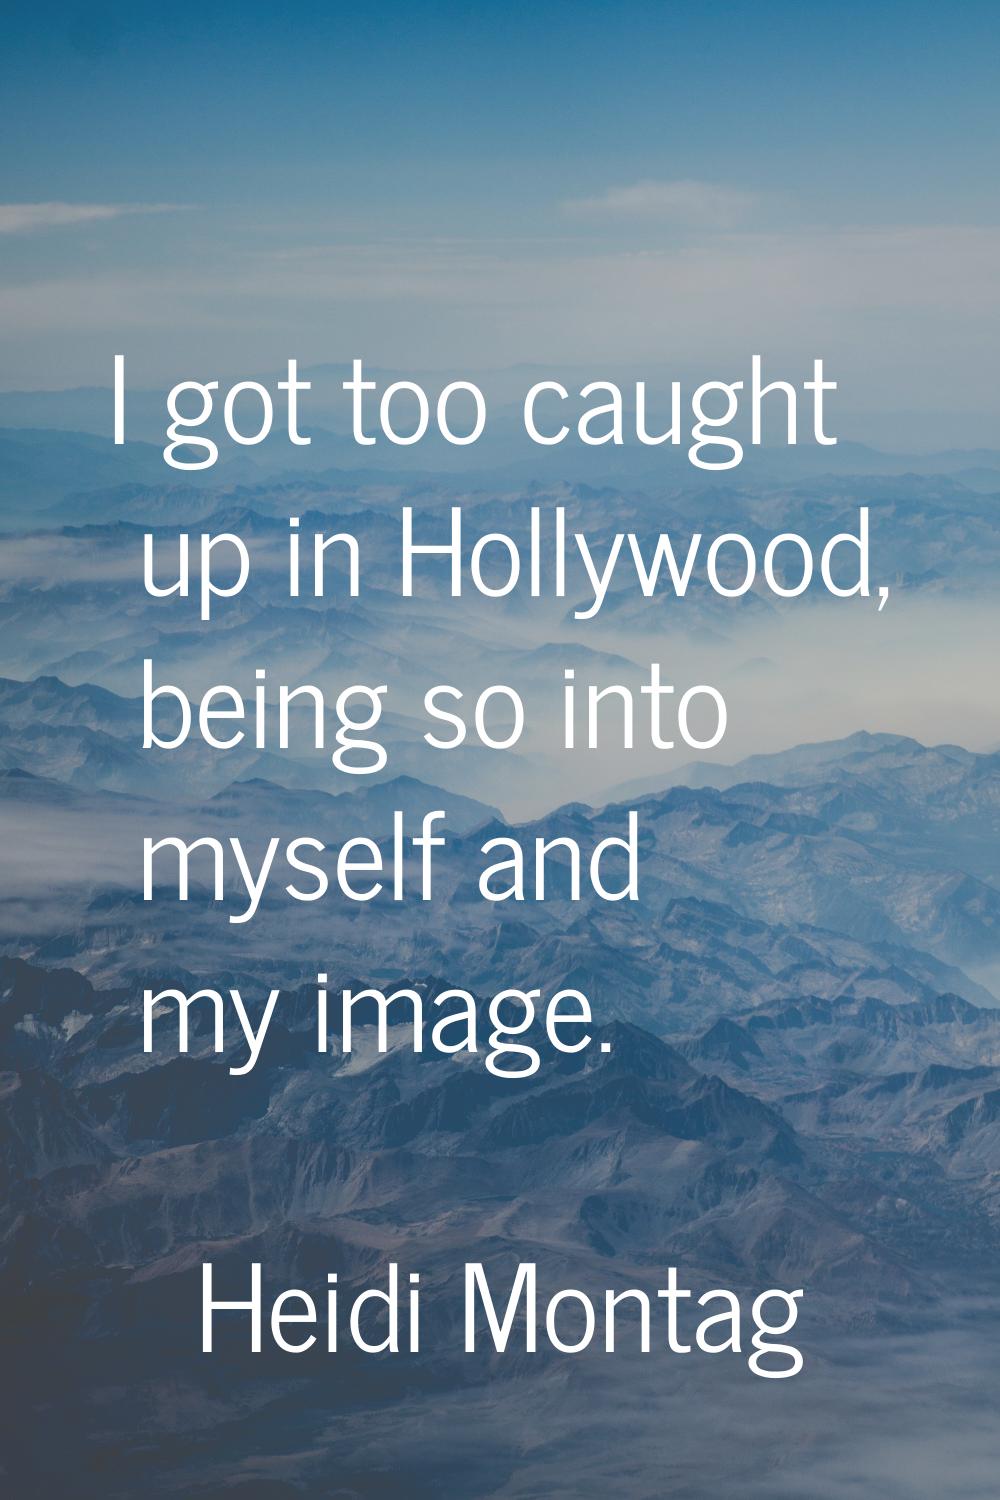 I got too caught up in Hollywood, being so into myself and my image.